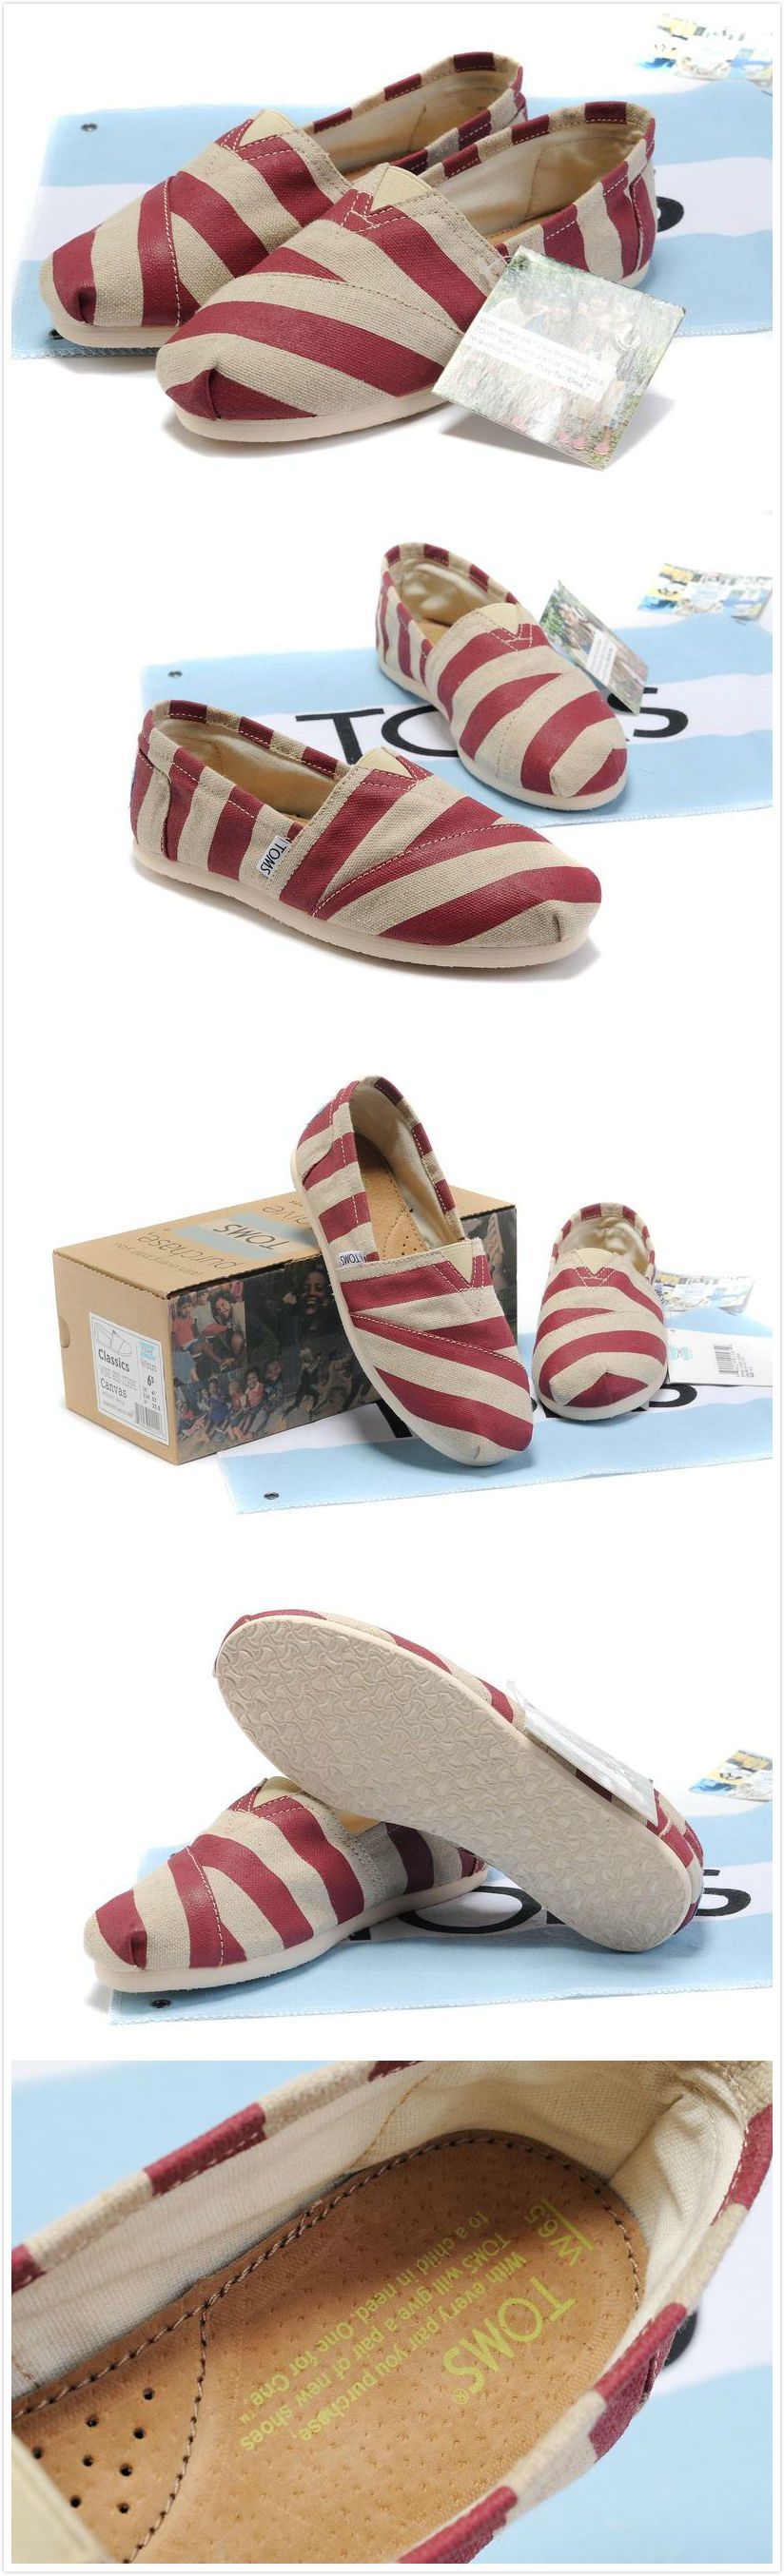 Toms Outlet! $19.99 OMG!! Holy cow, Im gonna love this site want it